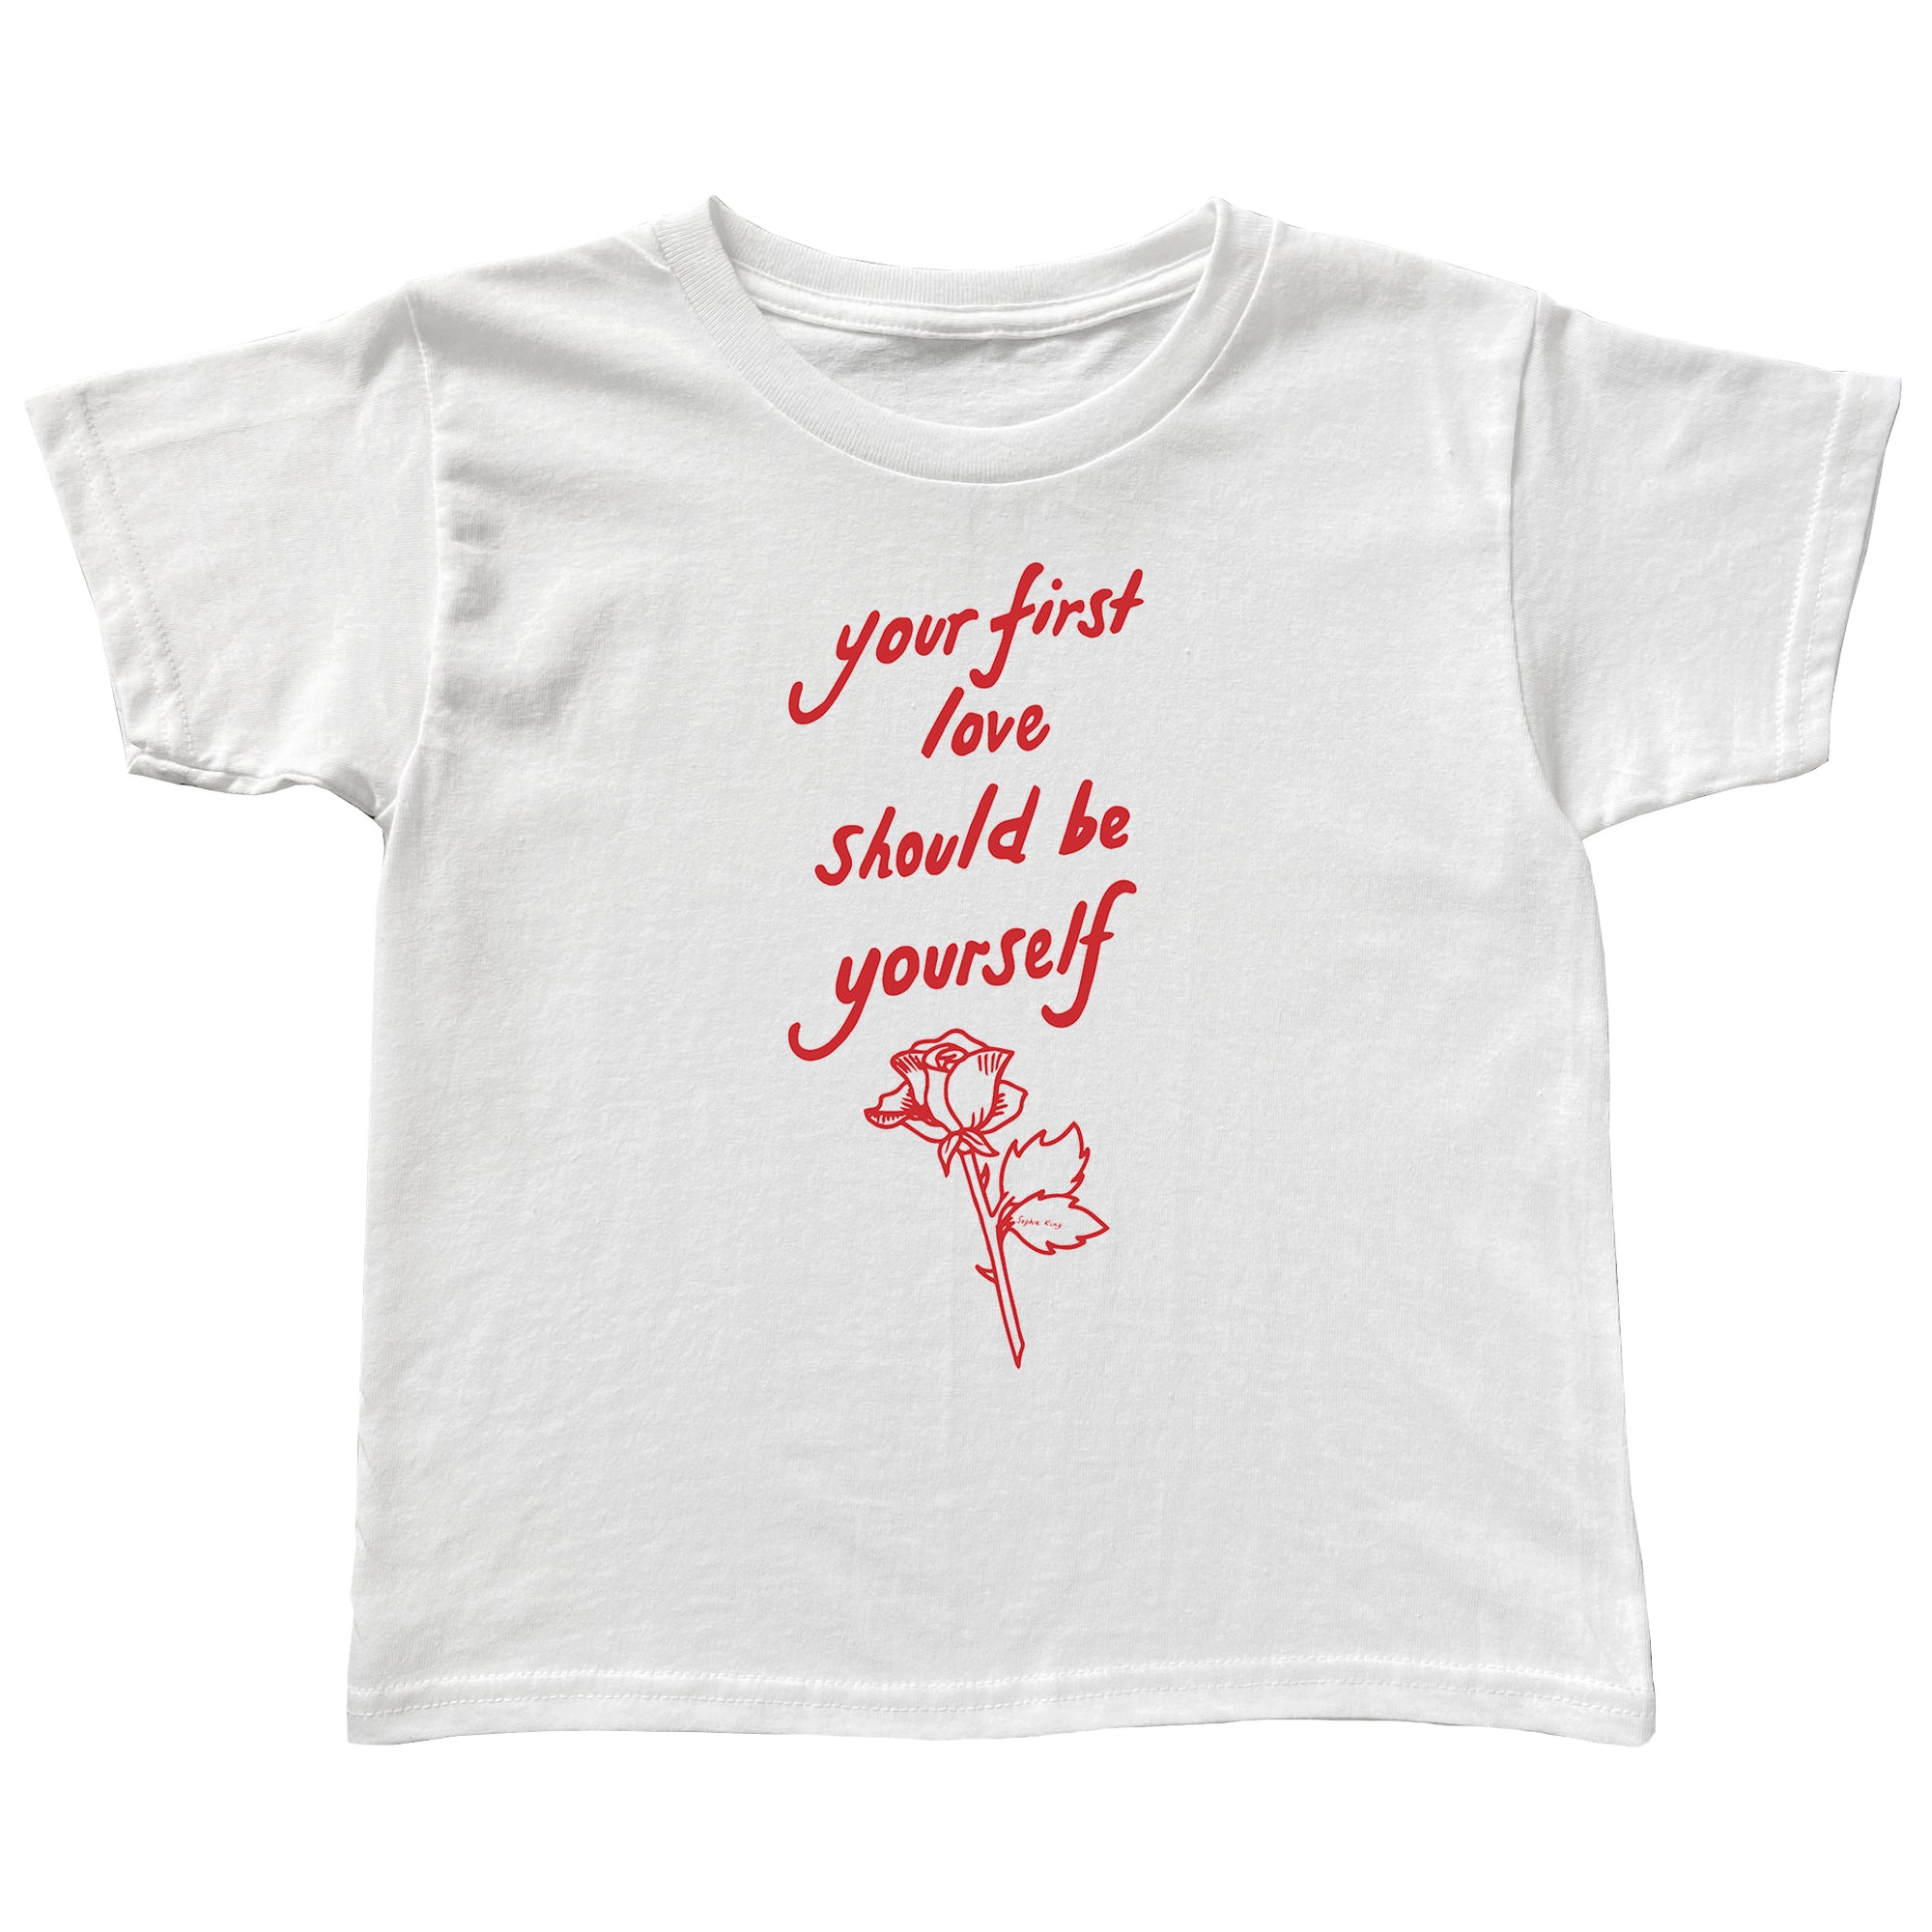 Your First Love Should Be Yourself (baby tee)